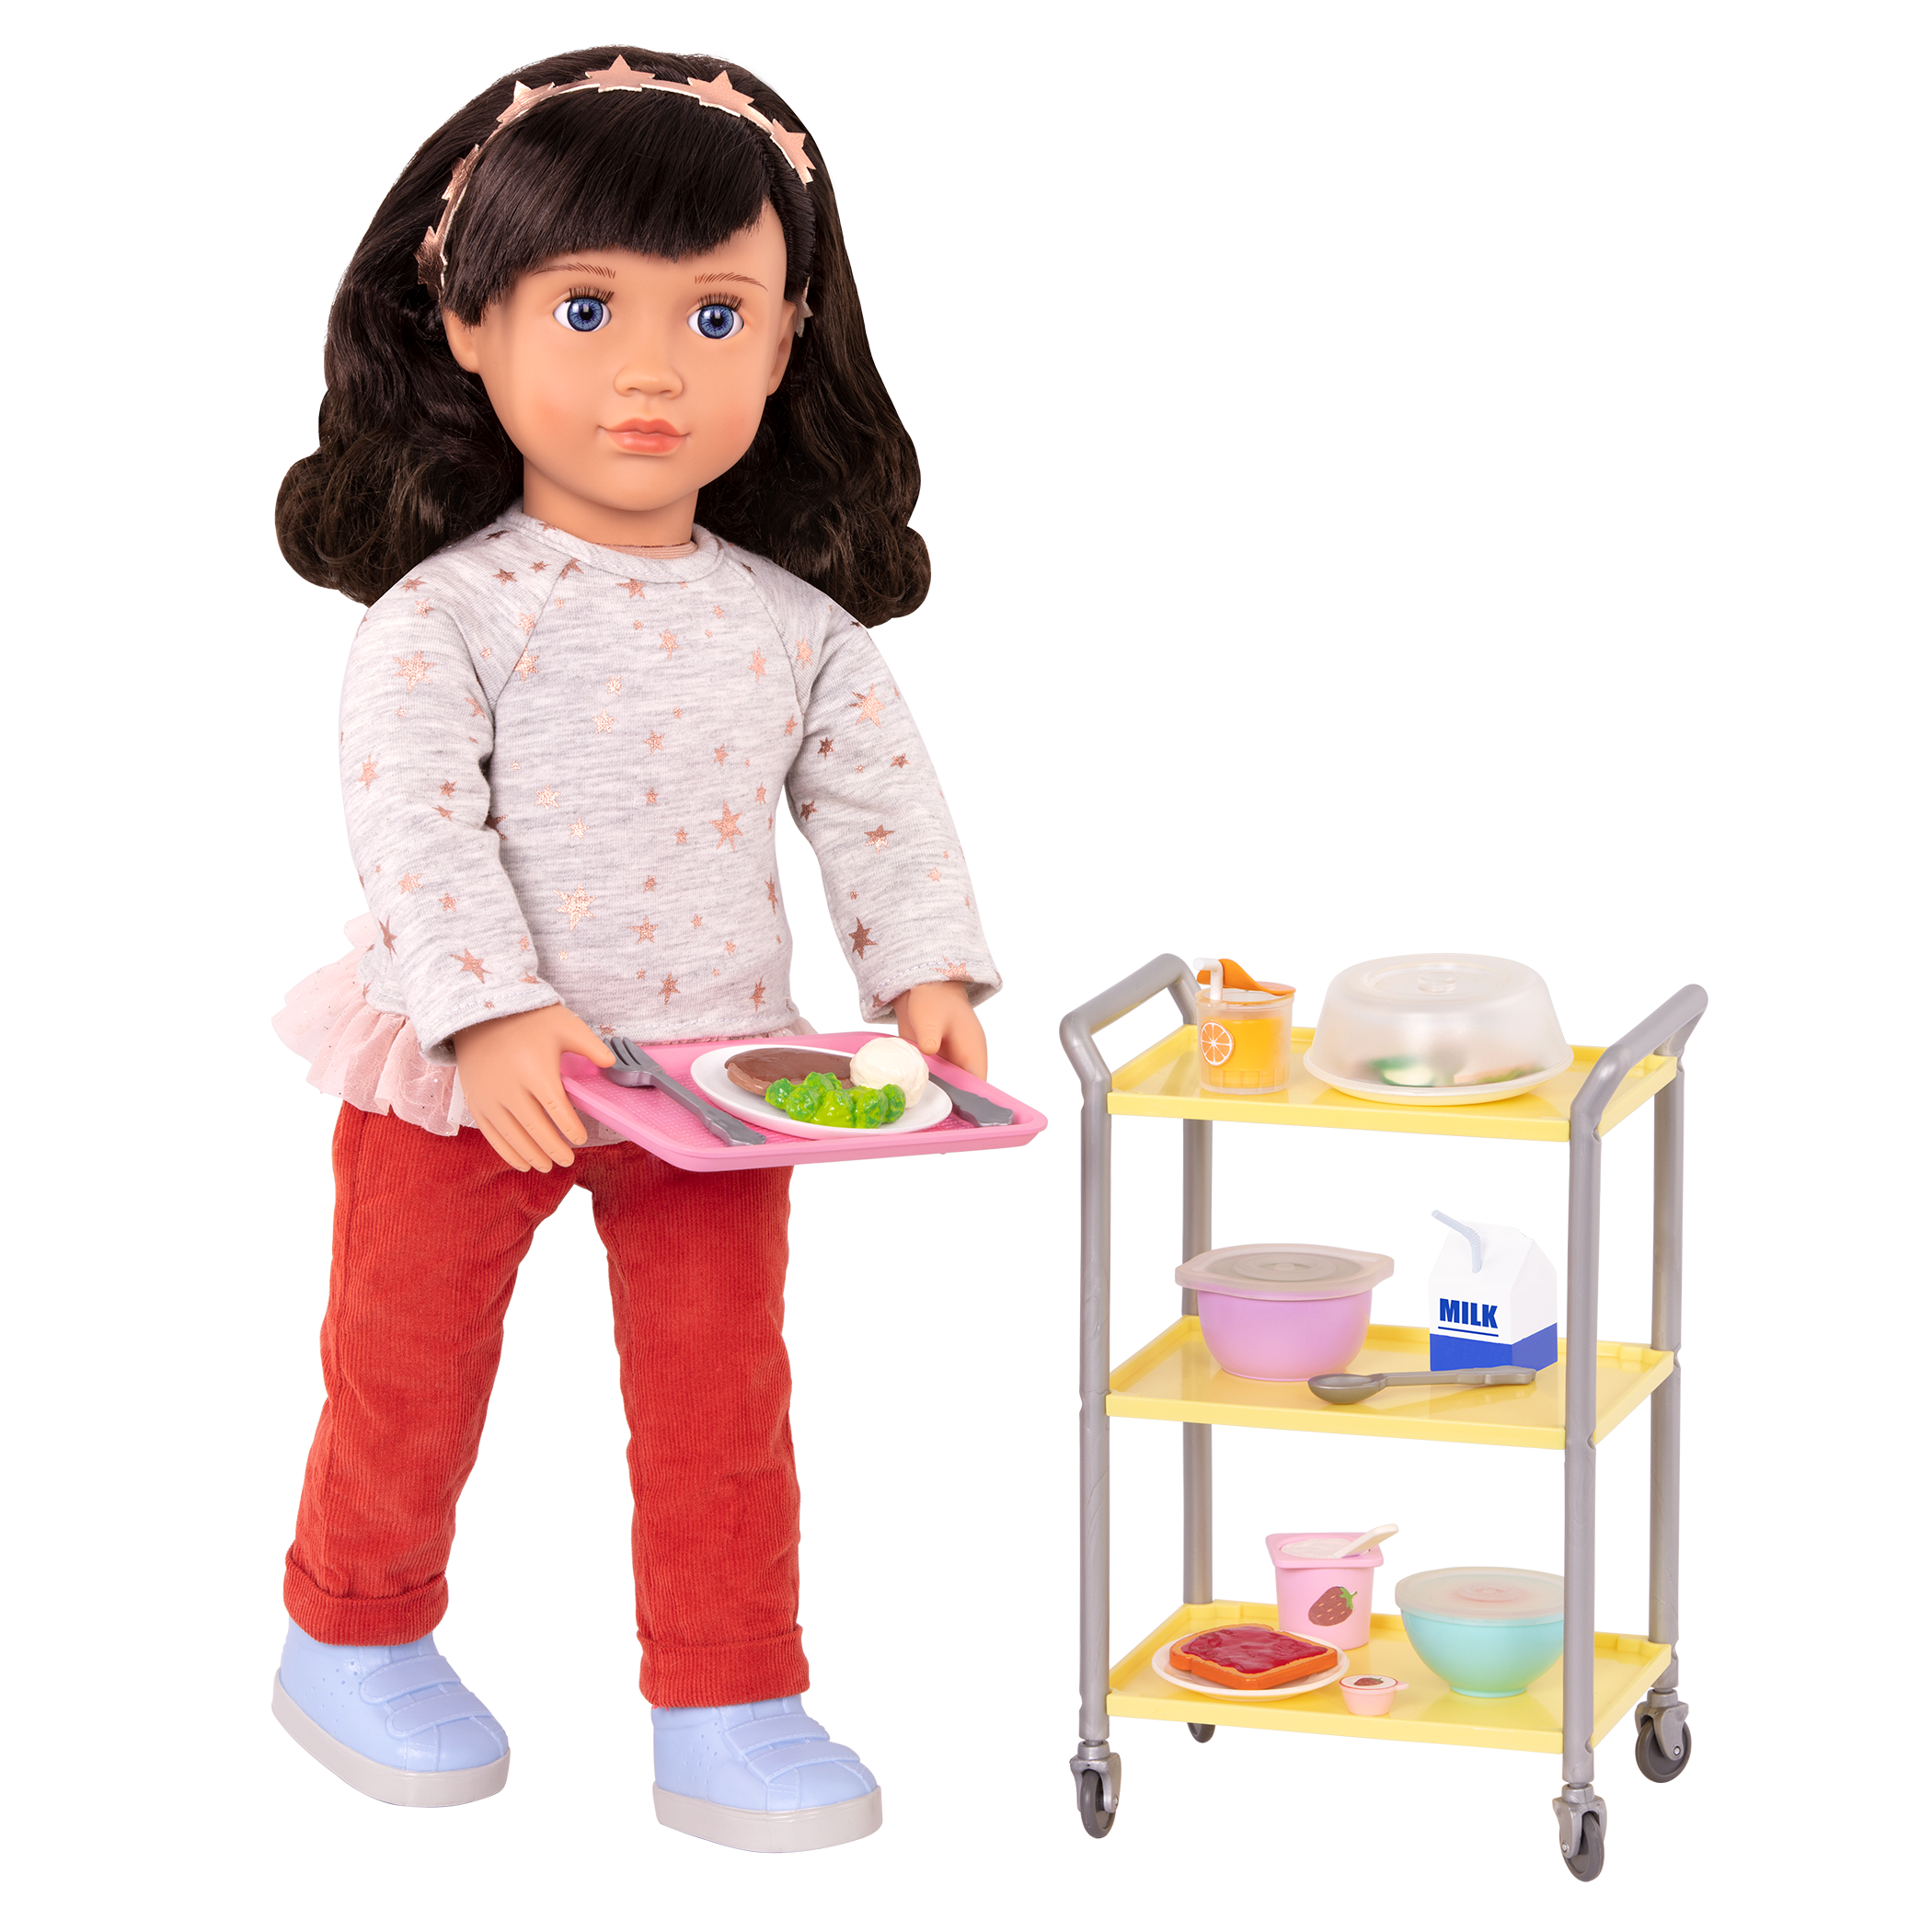 Hospital meal set on cart with 18-inch doll